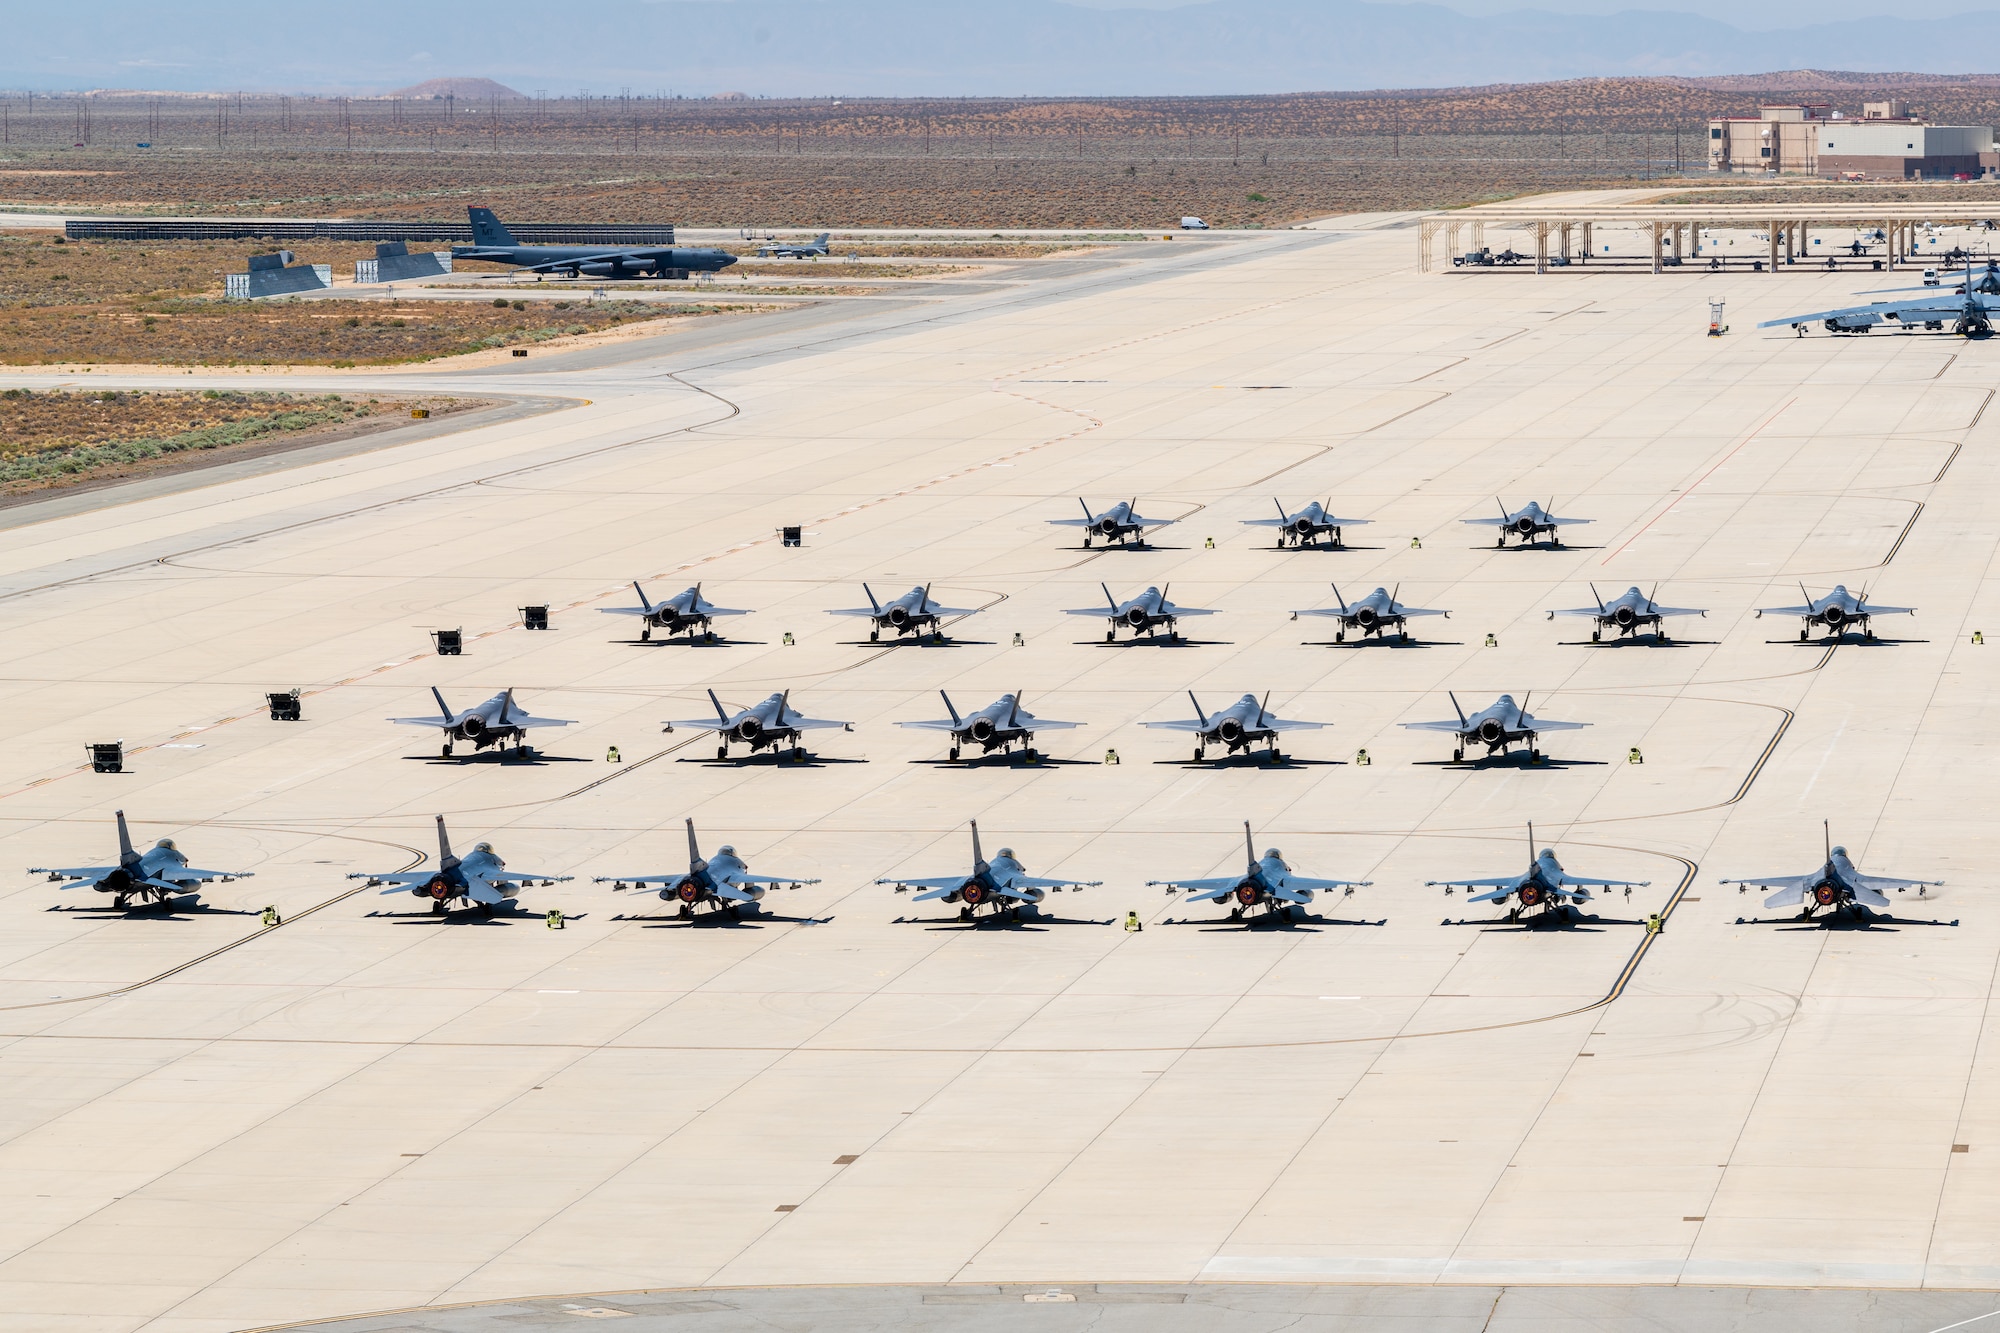 F-22s, F-35s, F-15s and F-16s assigned to the U.S. Air Force Weapons School park on the historic flightline at Edwards Air Force Base, California. The Weapons School provides academic and advisory support to numerous units, enhancing air combat training for thousands of Airmen from the Air Force, Department of Defense and U.S. allied services each year.